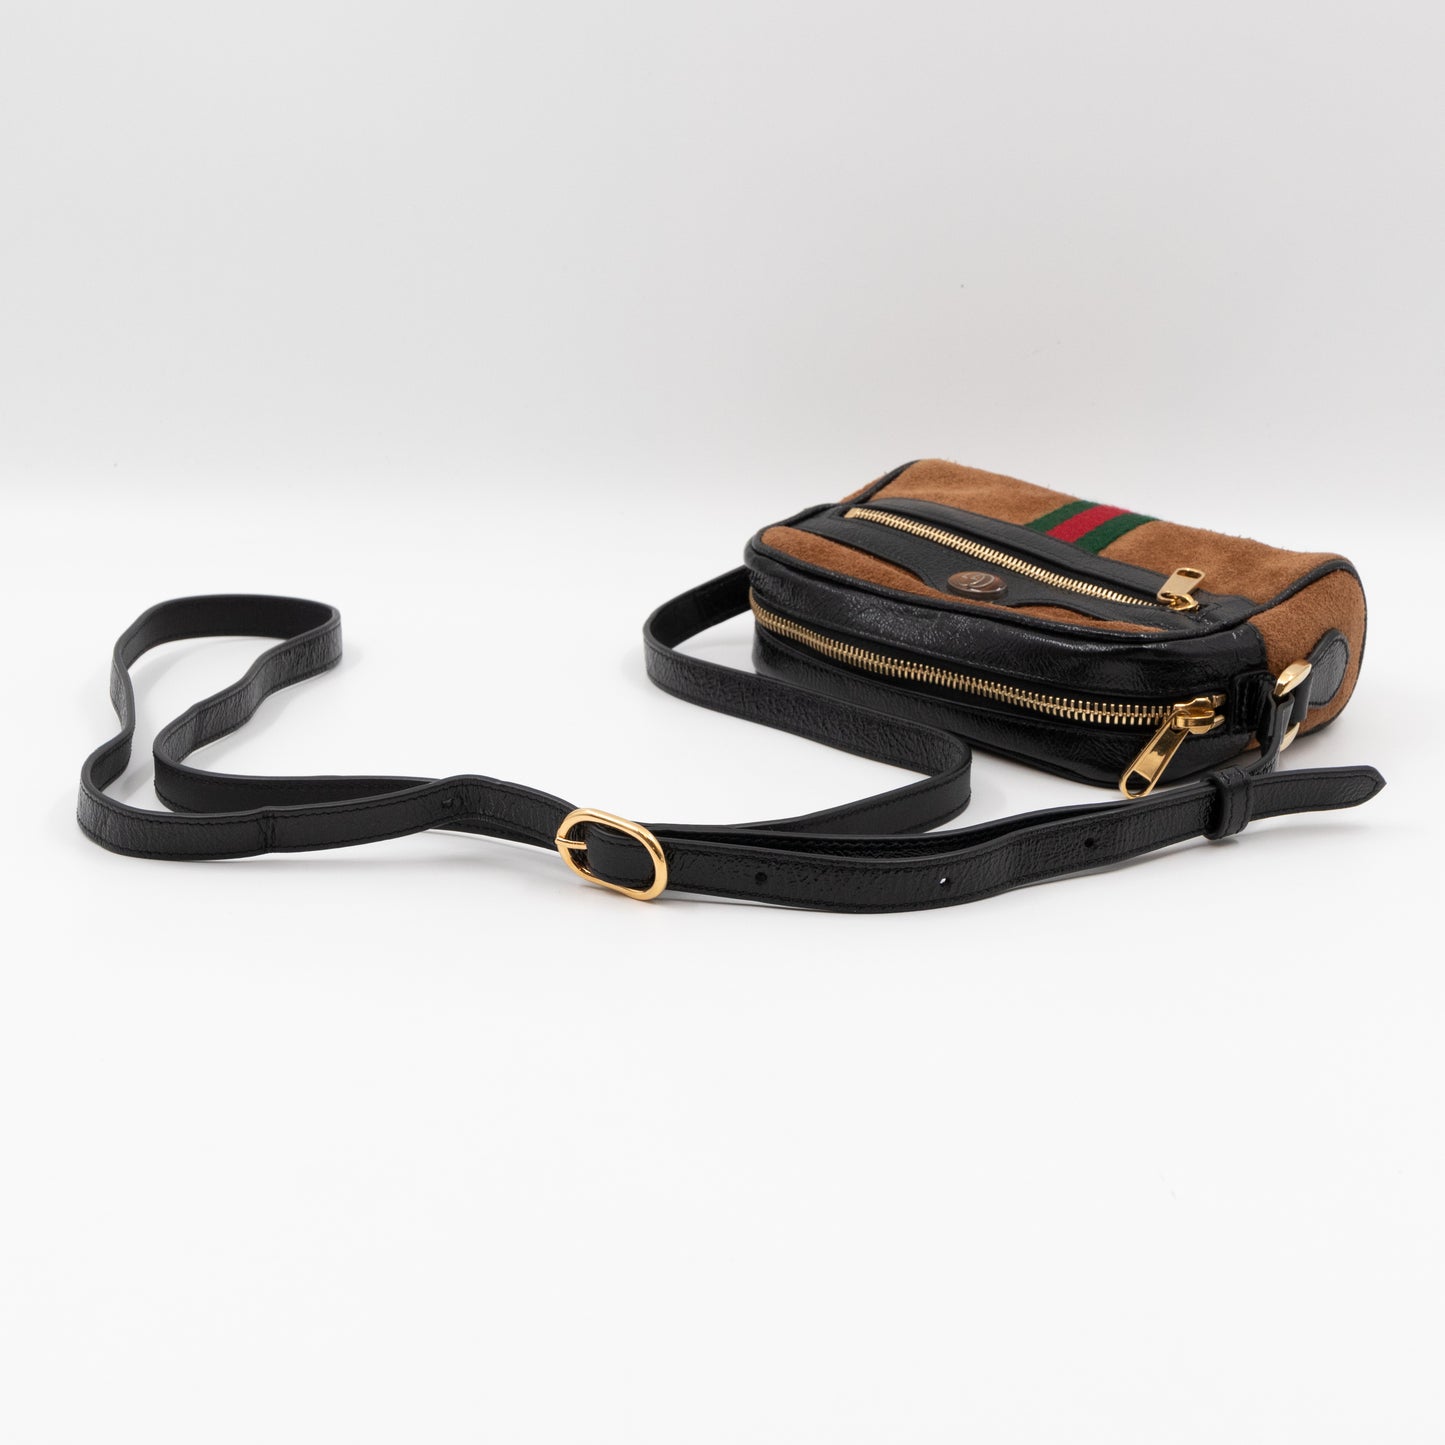 Mini Ophidia Web Crossbody Brown Suede Black Leather